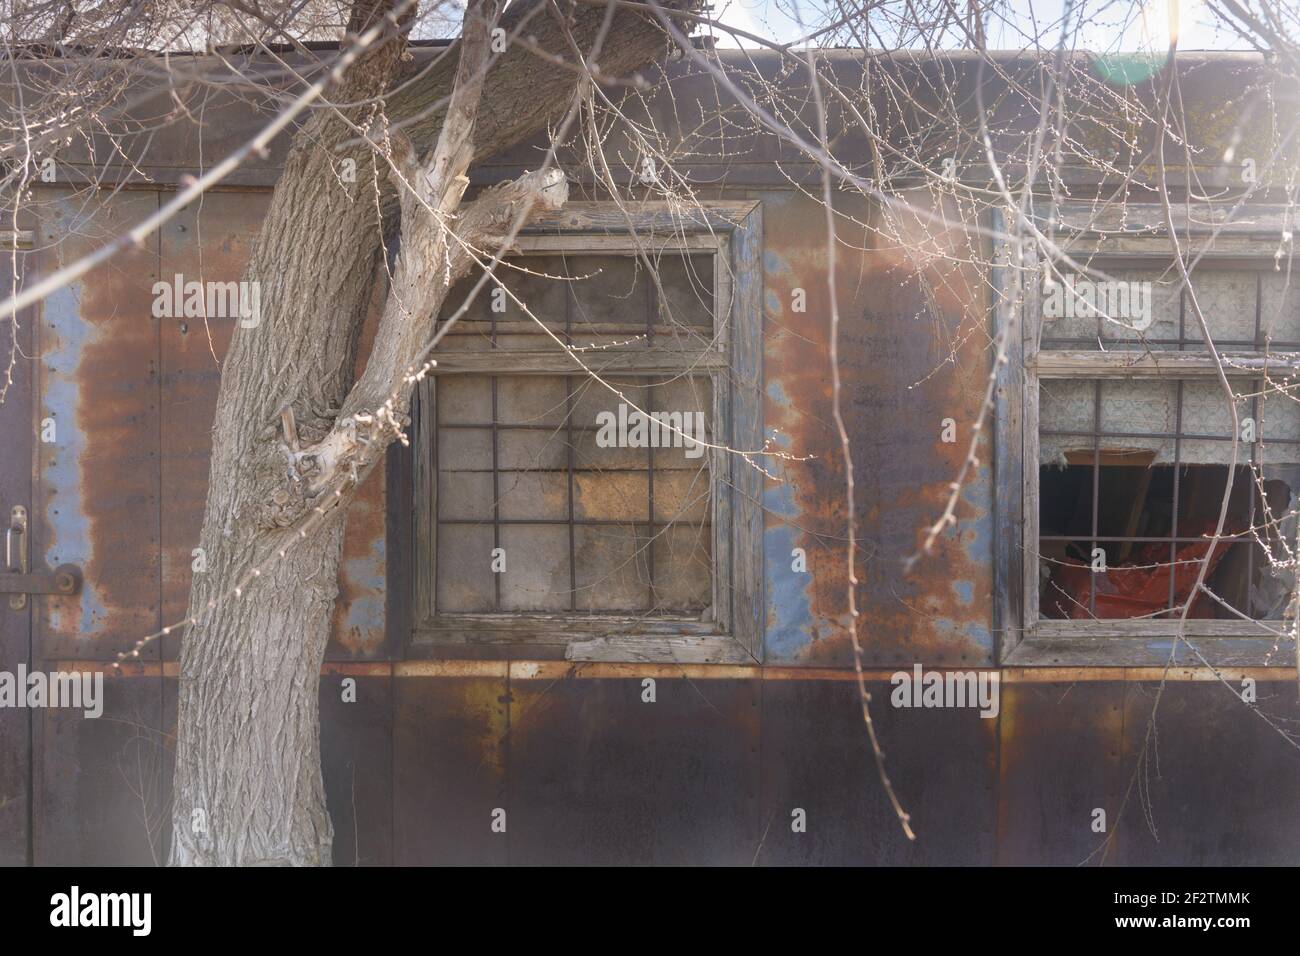 Old abandoned iron building,  residential trailer with bars on windows. Rust and peeling paint on walls of facade. Stock Photo